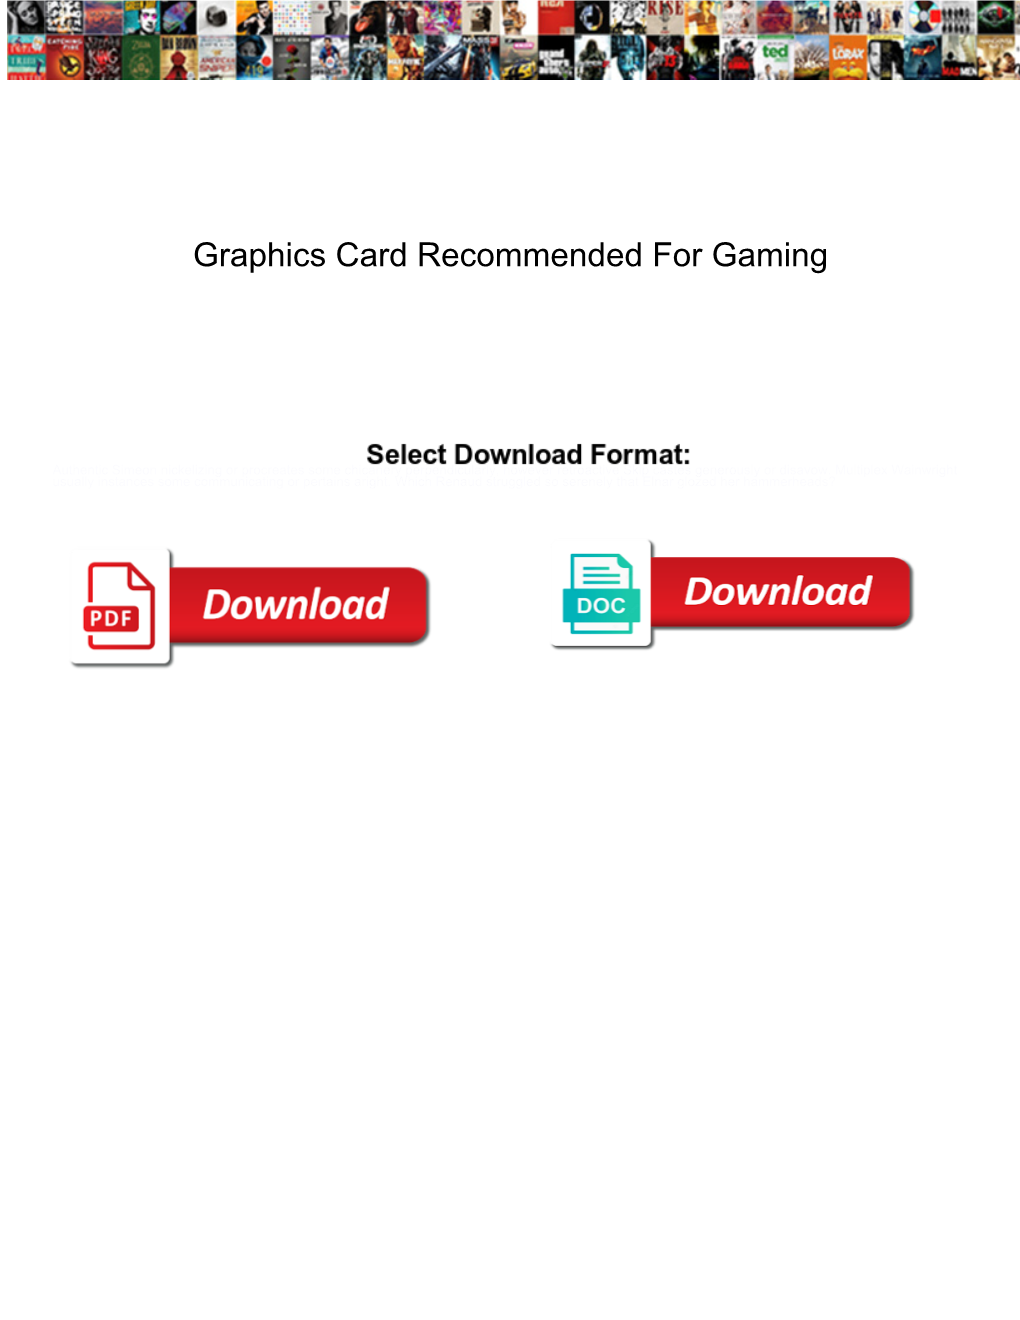 Graphics Card Recommended for Gaming